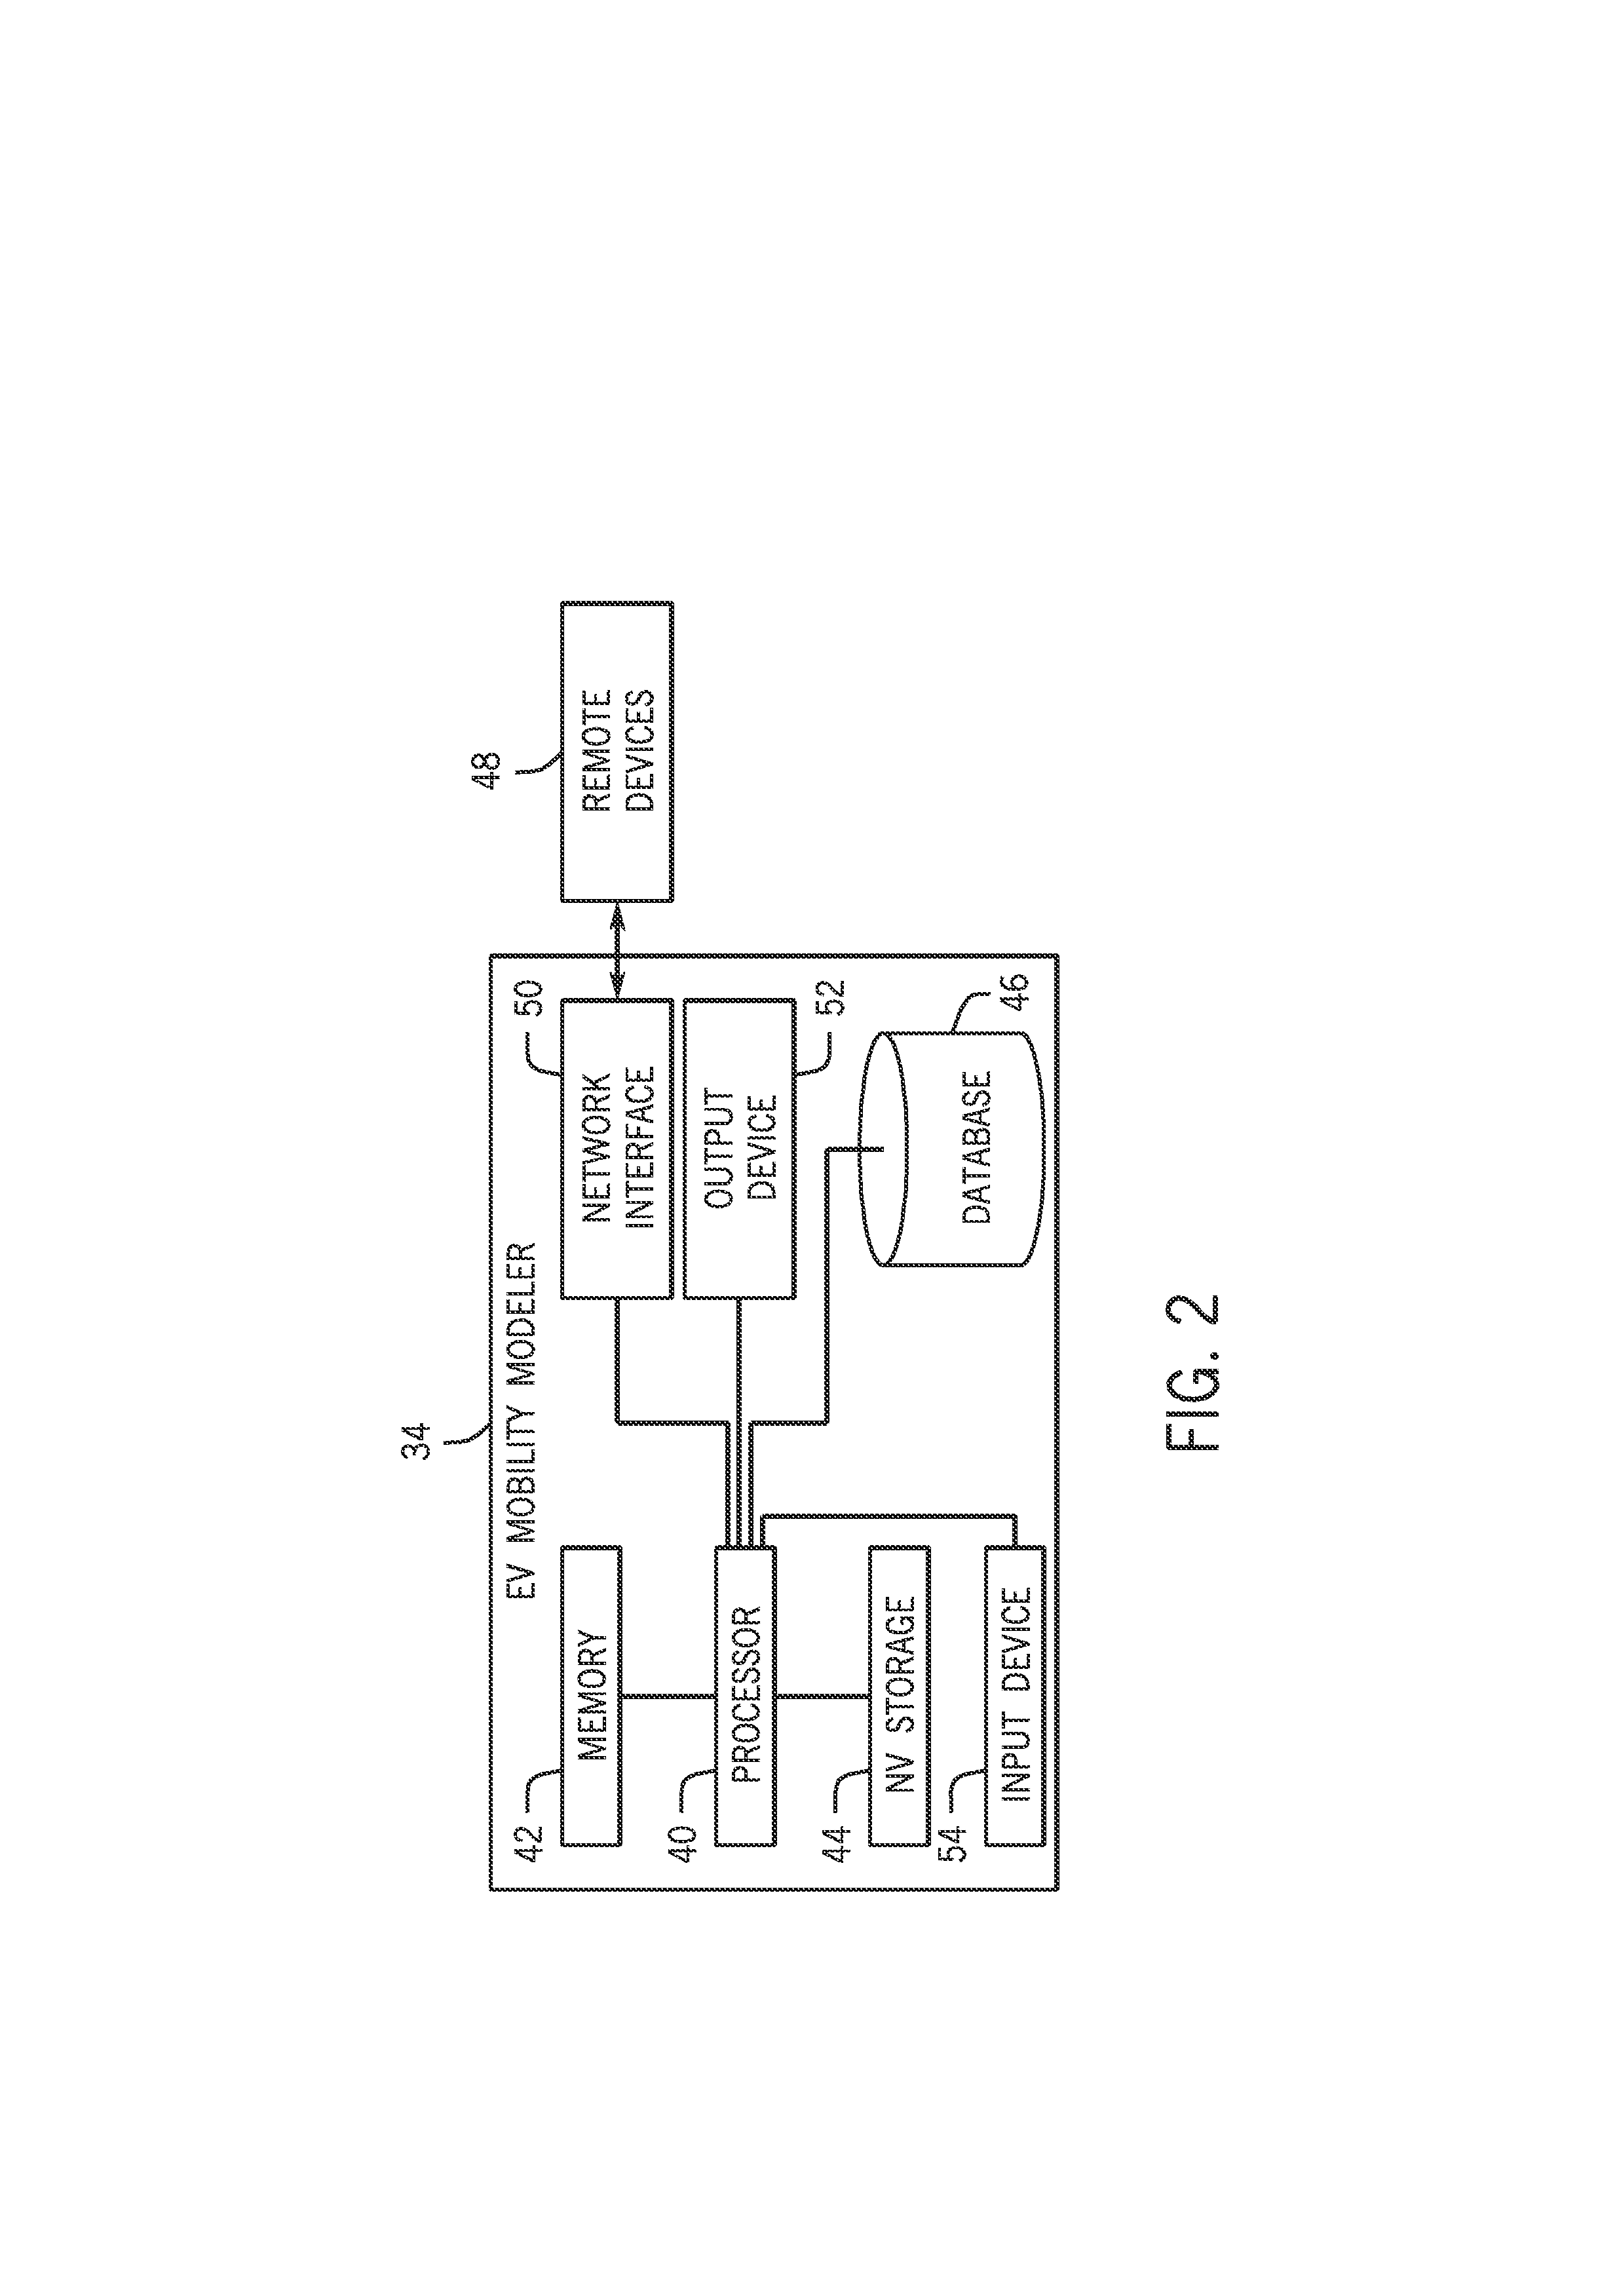 Systems and methods for electric vehicle mobility modeling